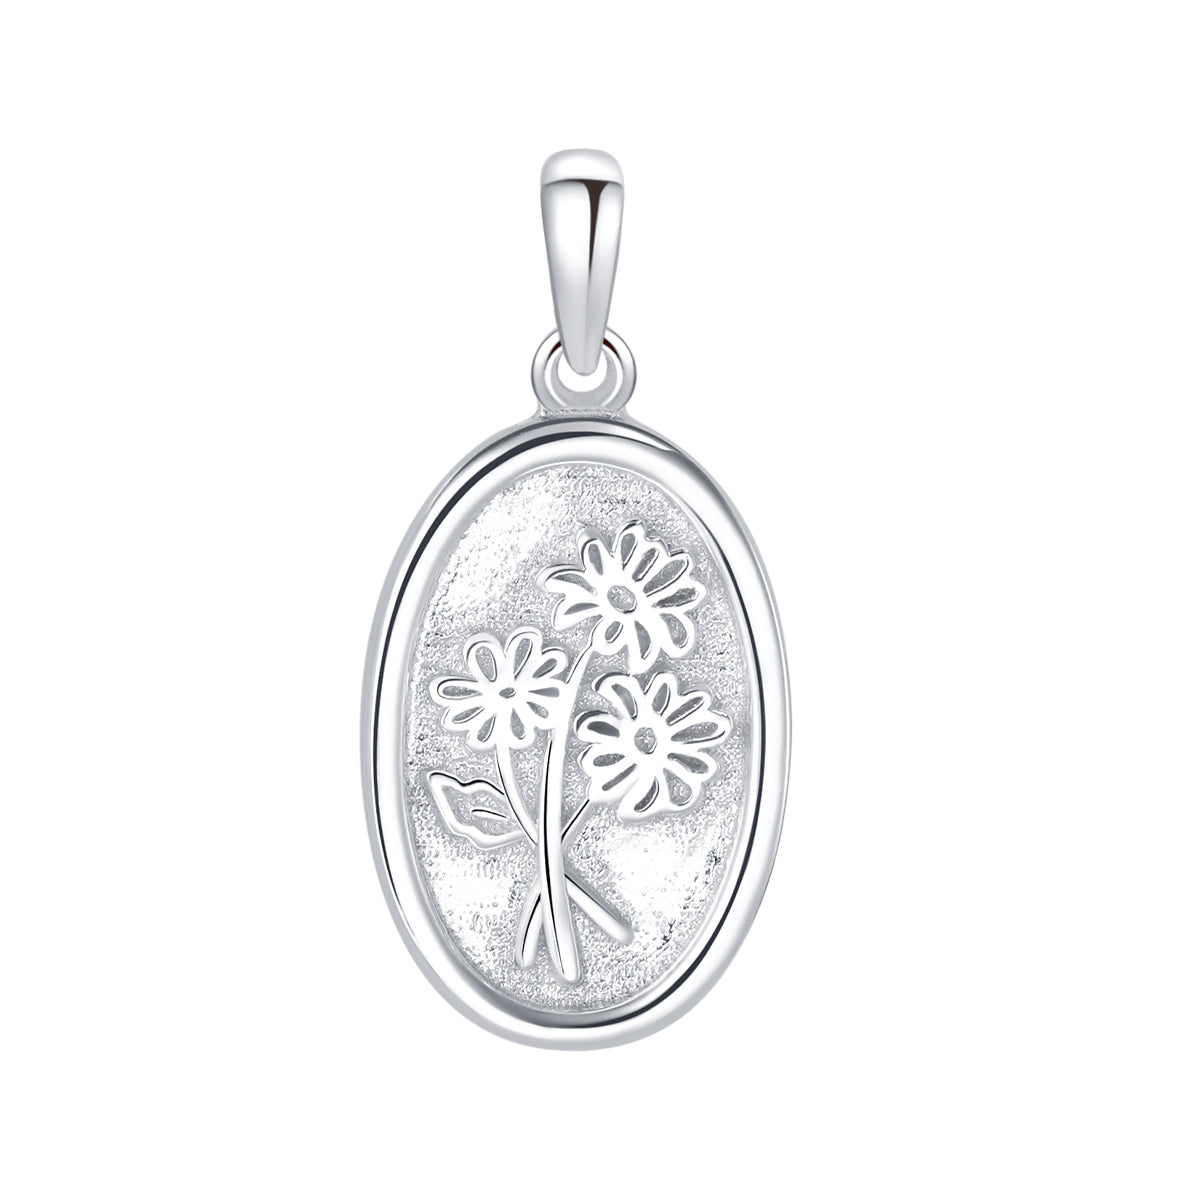 Oval Daisy Pendant Necklace Sterling Silver